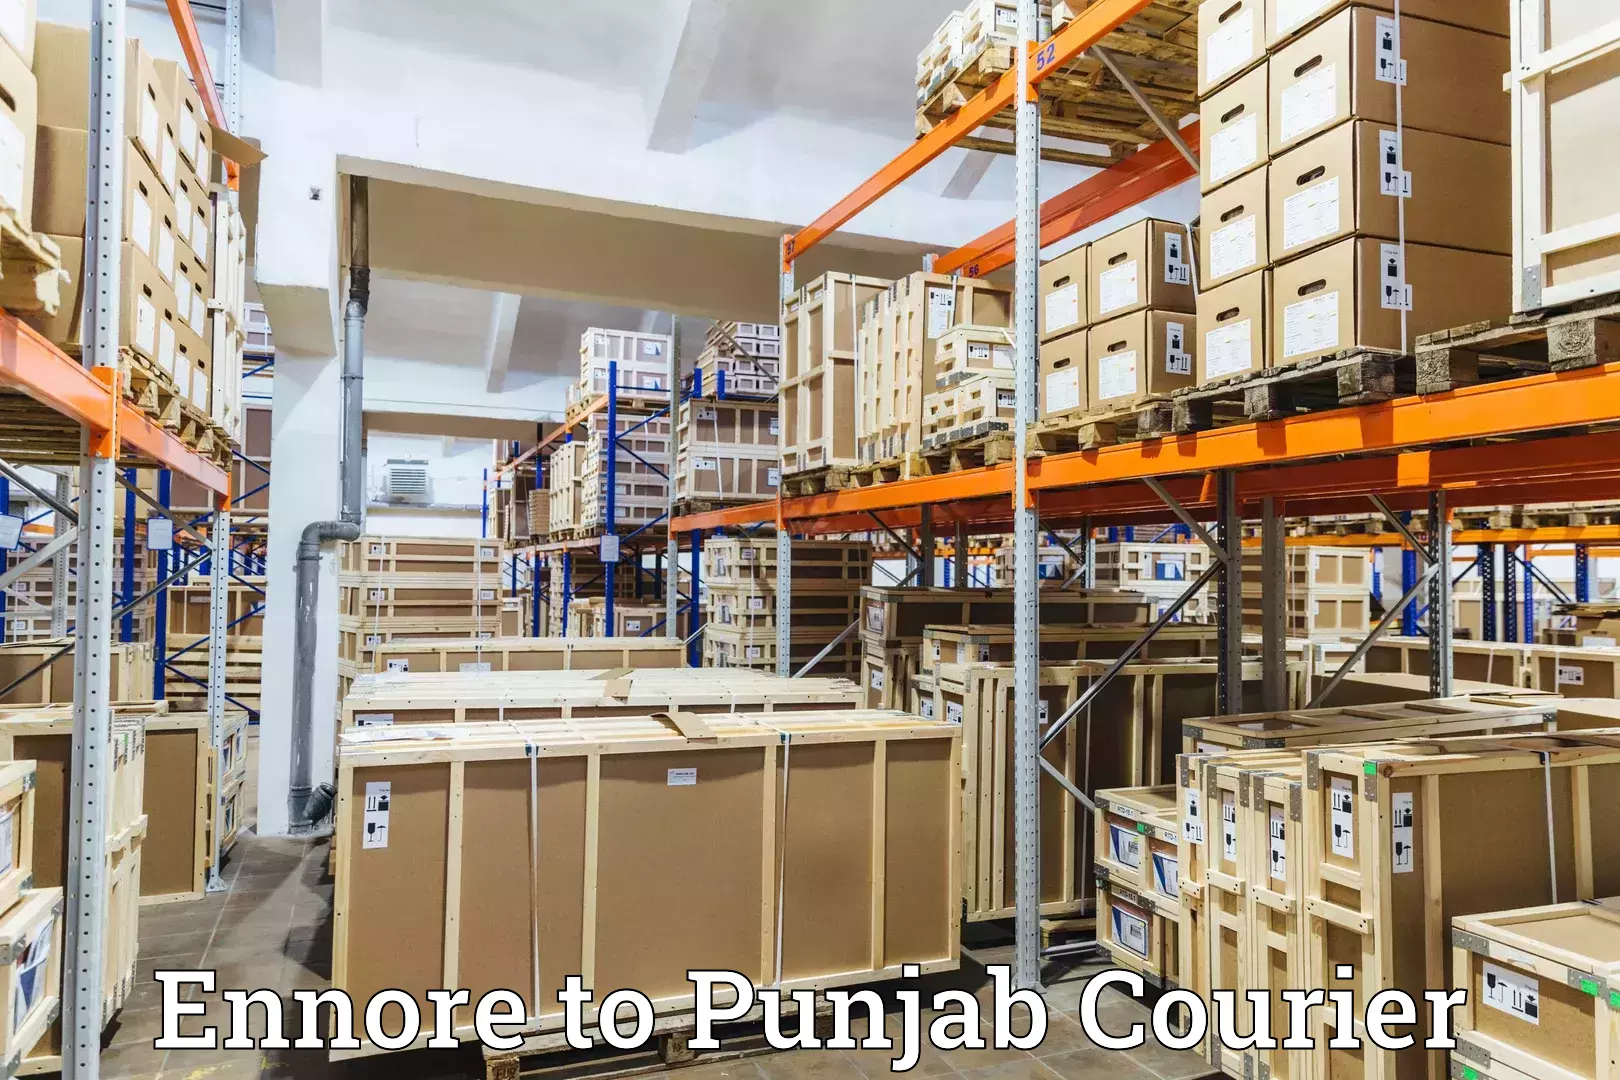 24/7 courier service Ennore to Anandpur Sahib